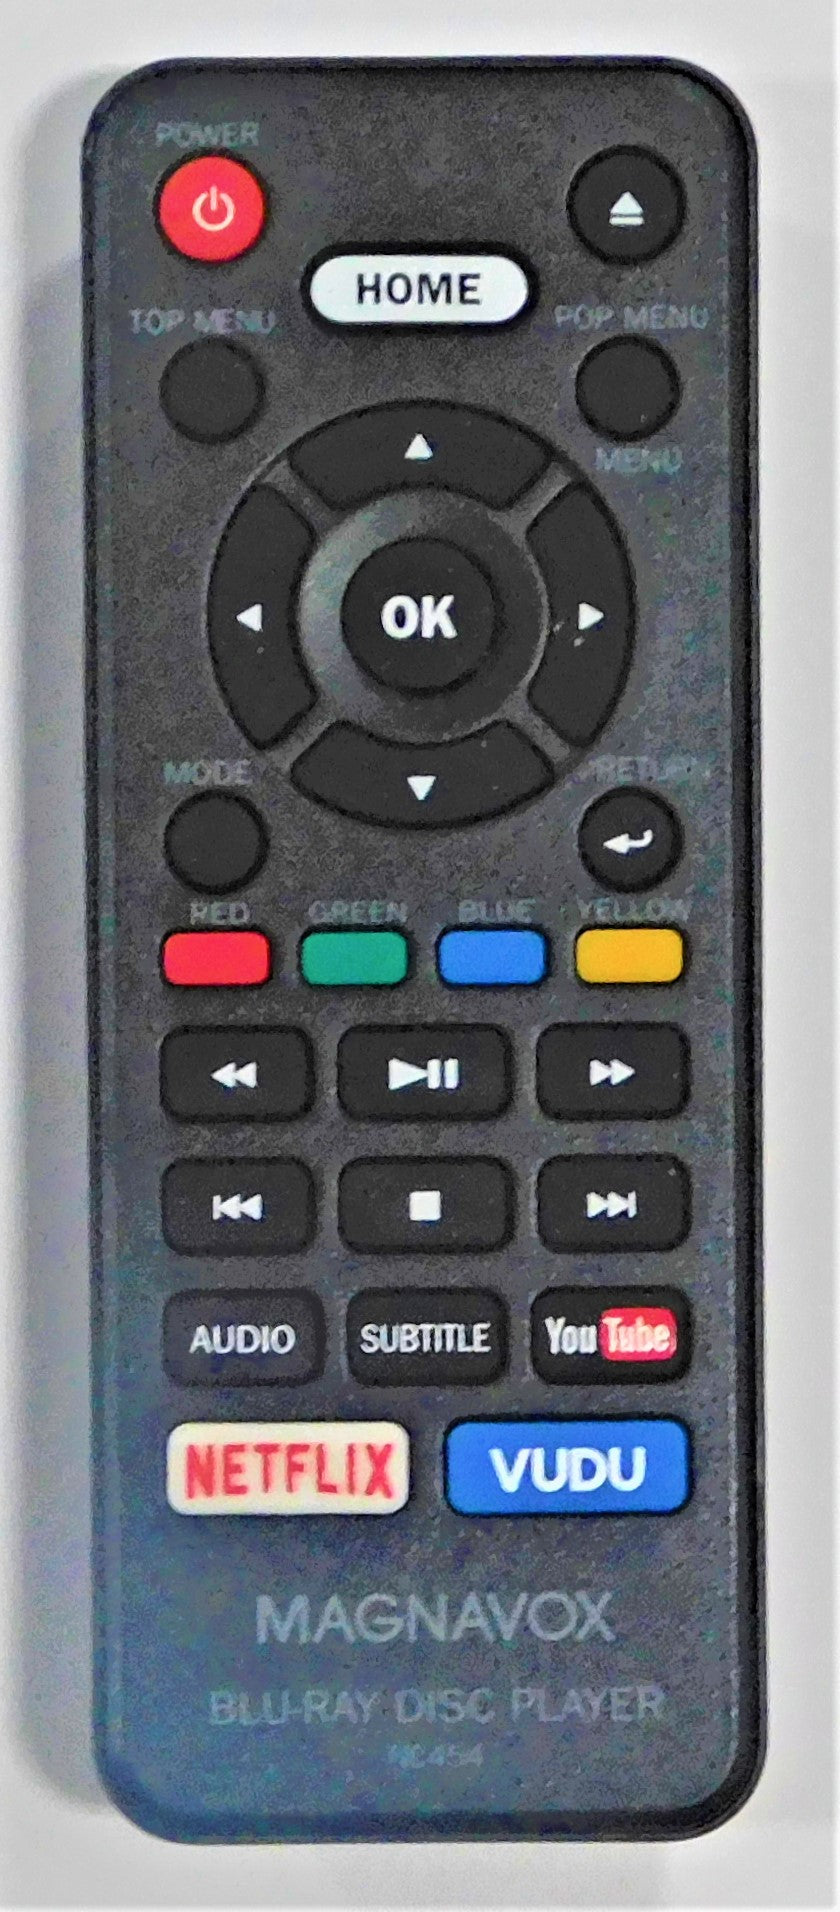 Original OEM replacement remote control for Magnavox Blu-ray player NC454UL